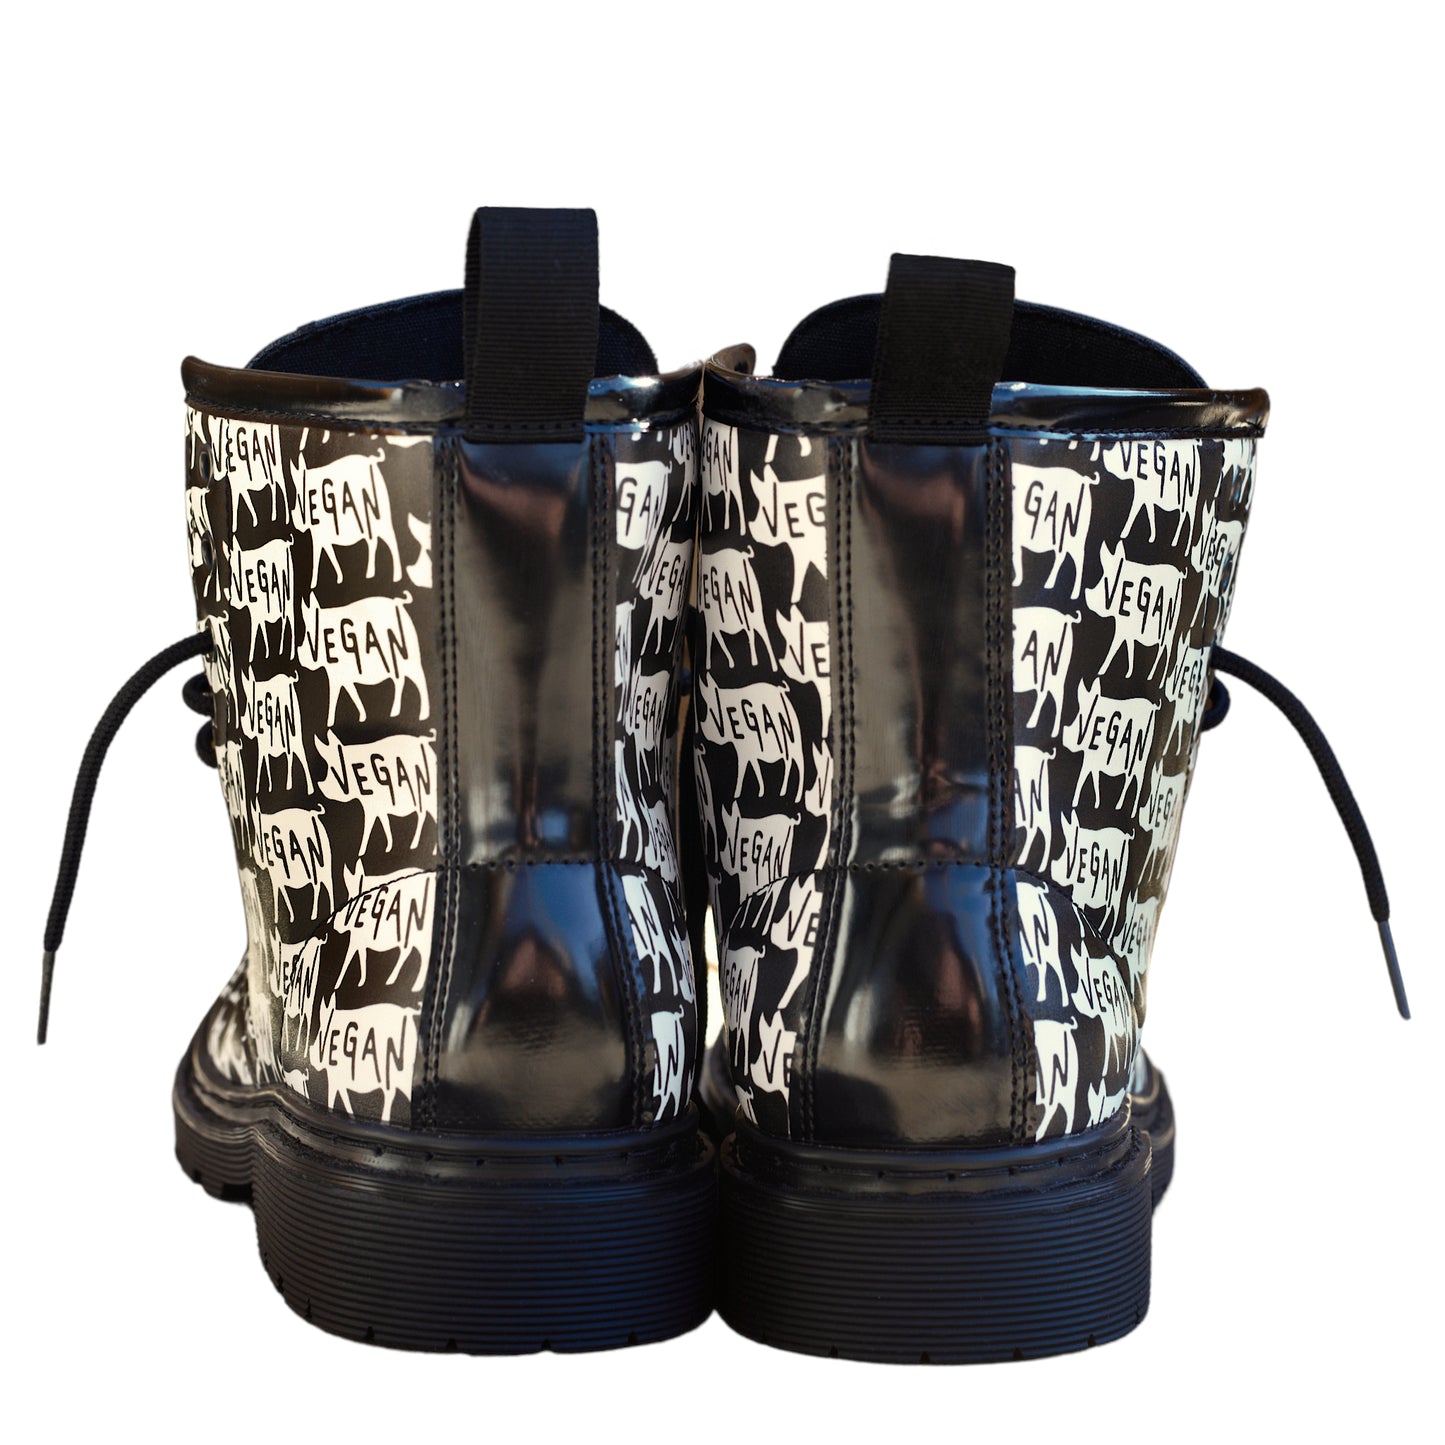 VEGAN Dr Martin Styled Boots